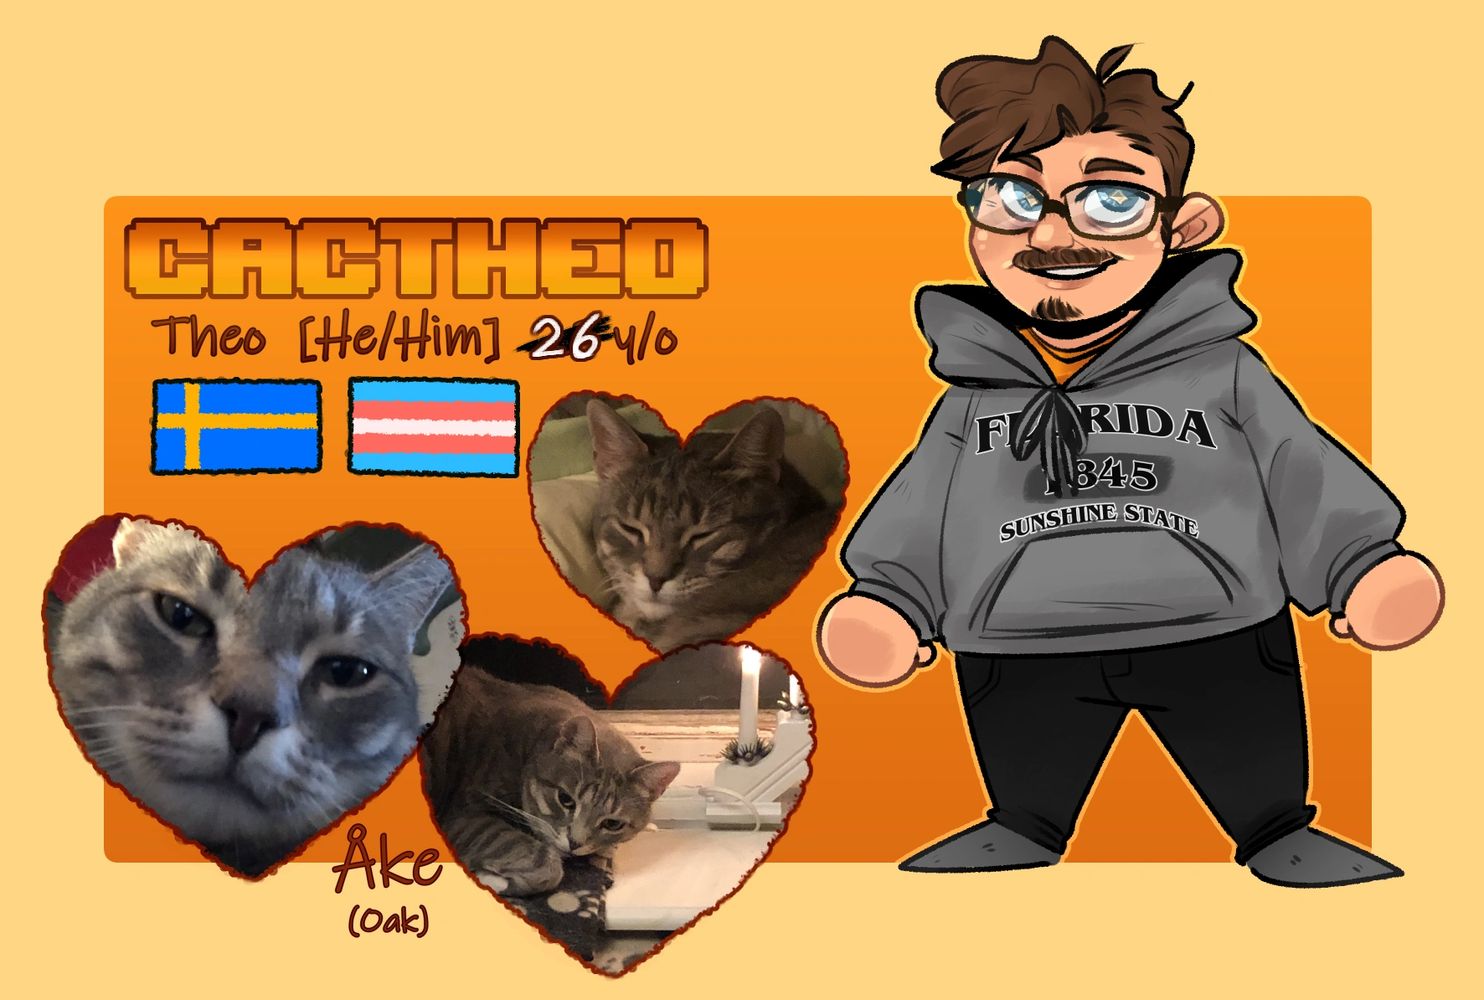 Introduction art of the artist & photos of his cat Oak and the text: cactheo, Theo, He/Him, 26 y/o